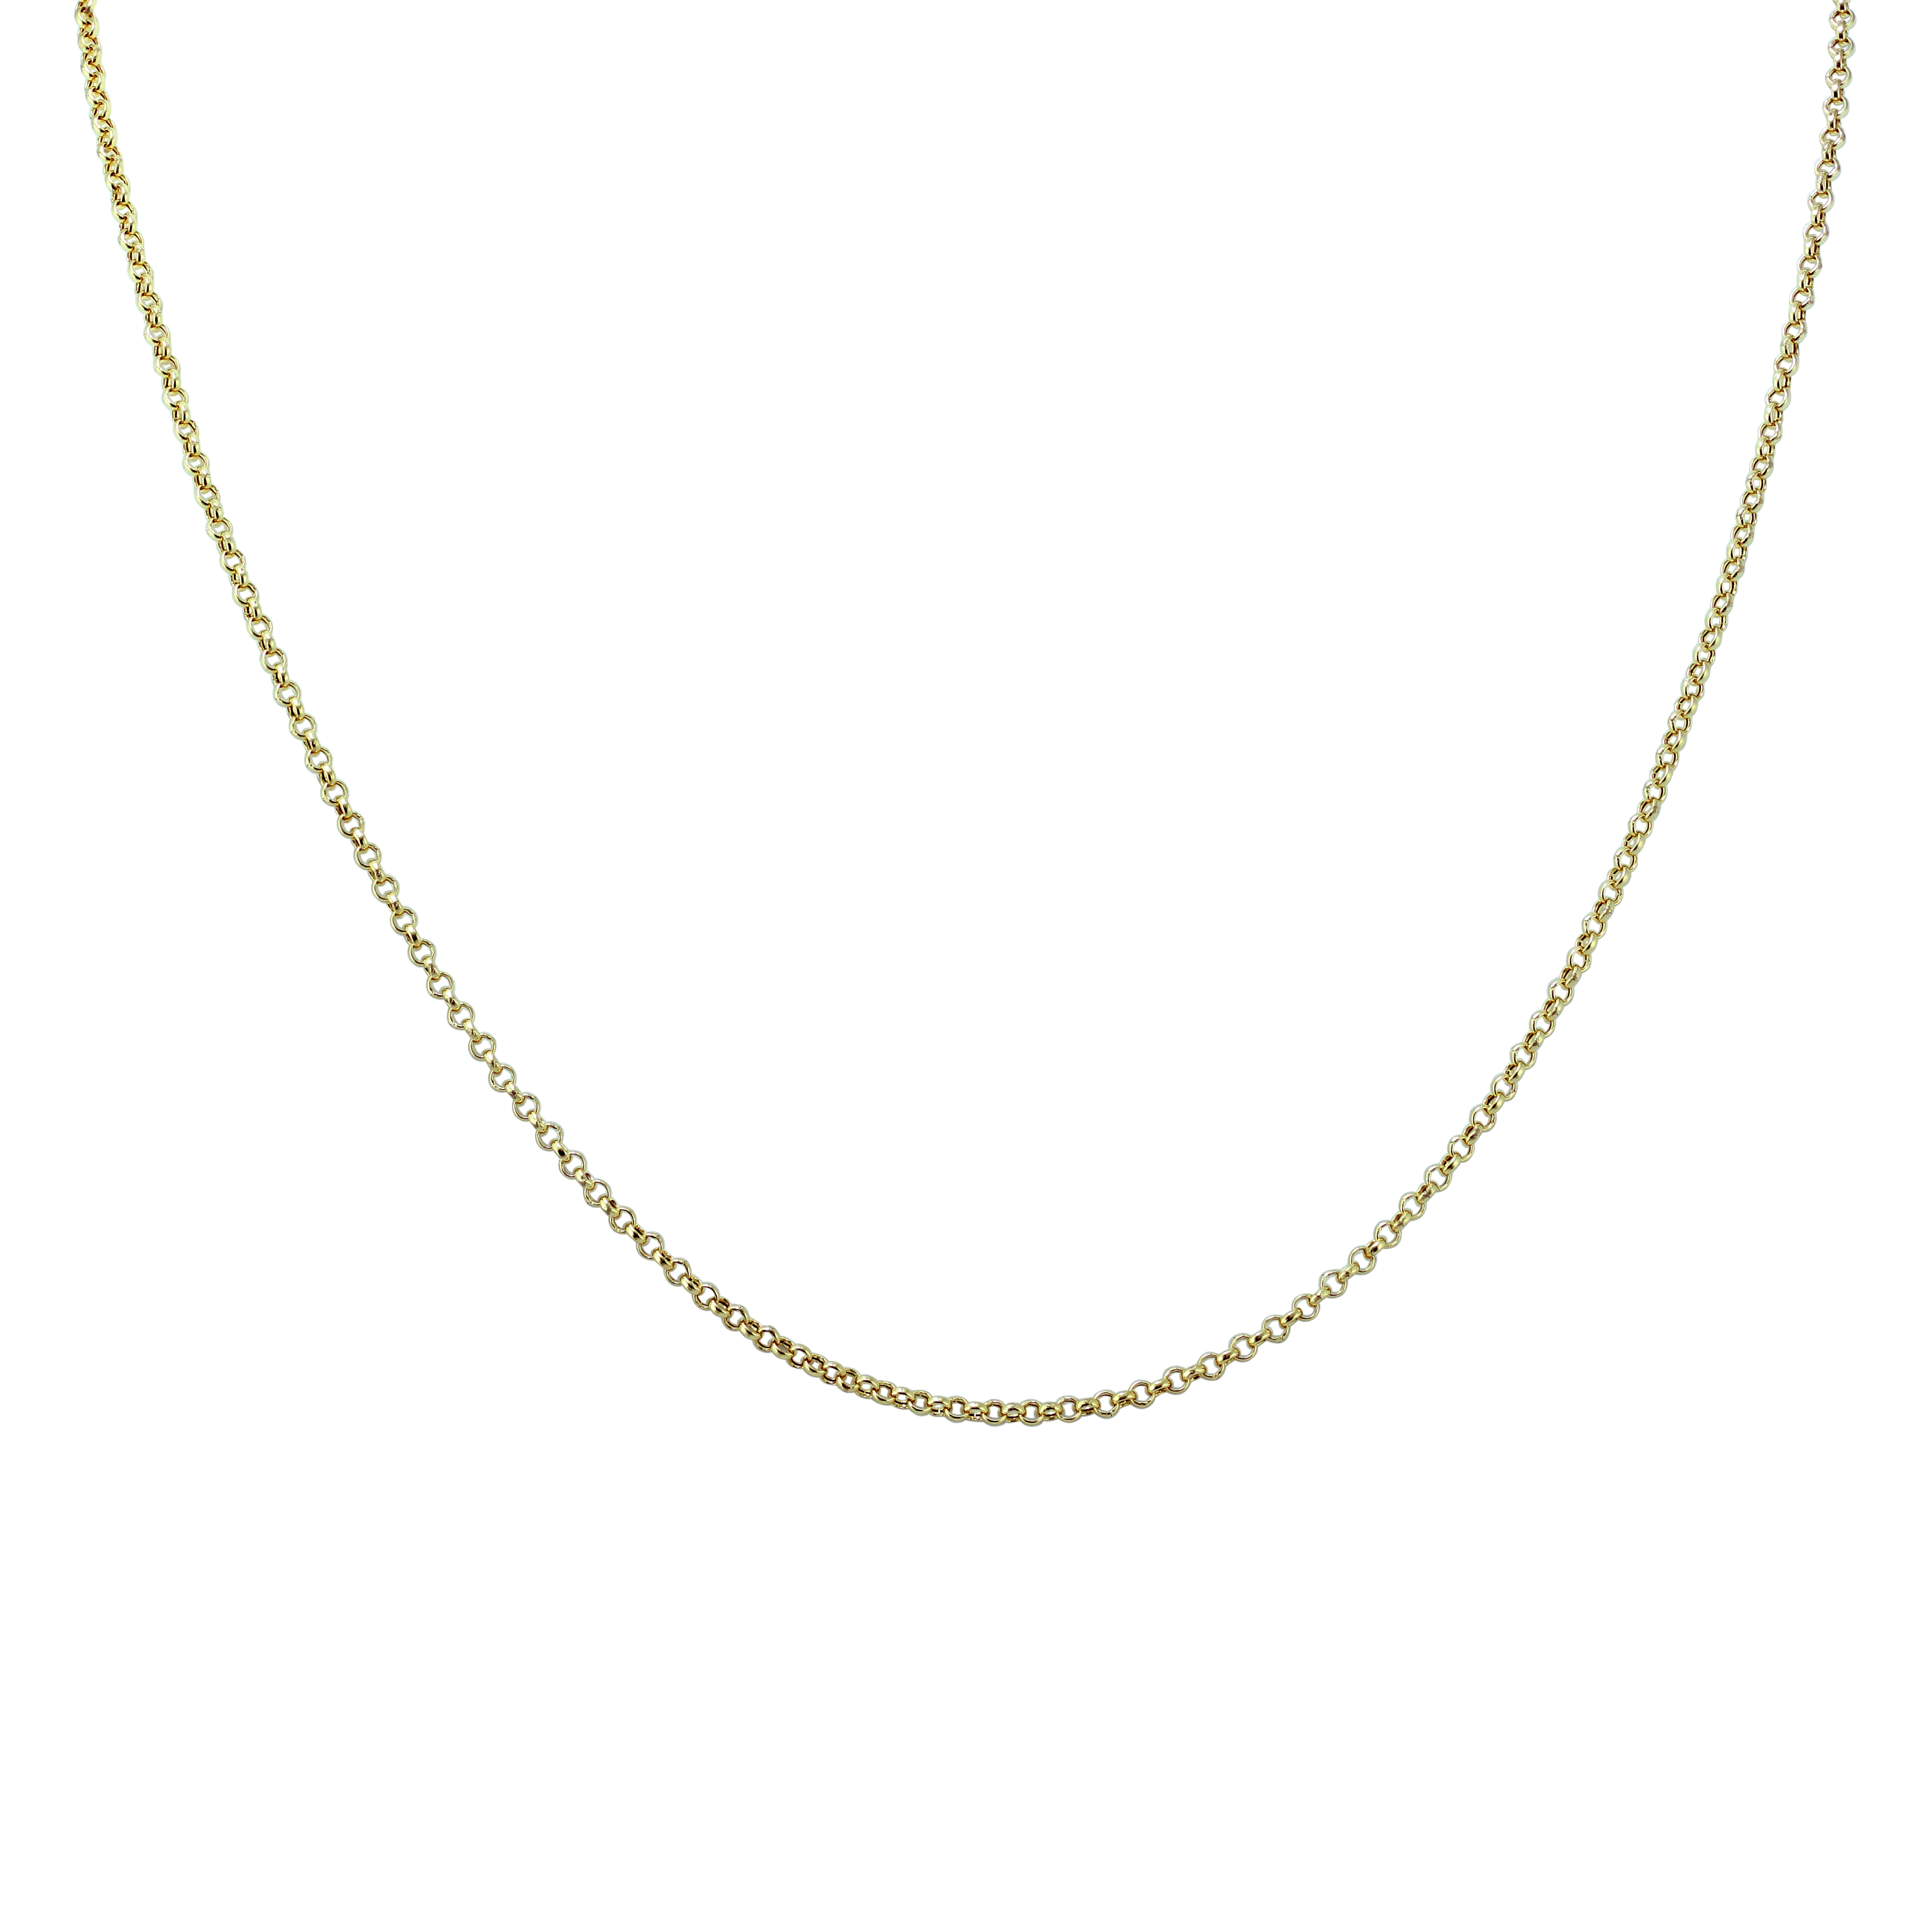 14K Yellow Gold 1.9mm Rolo Chain with Spring Ring Clasp - 24 Inch